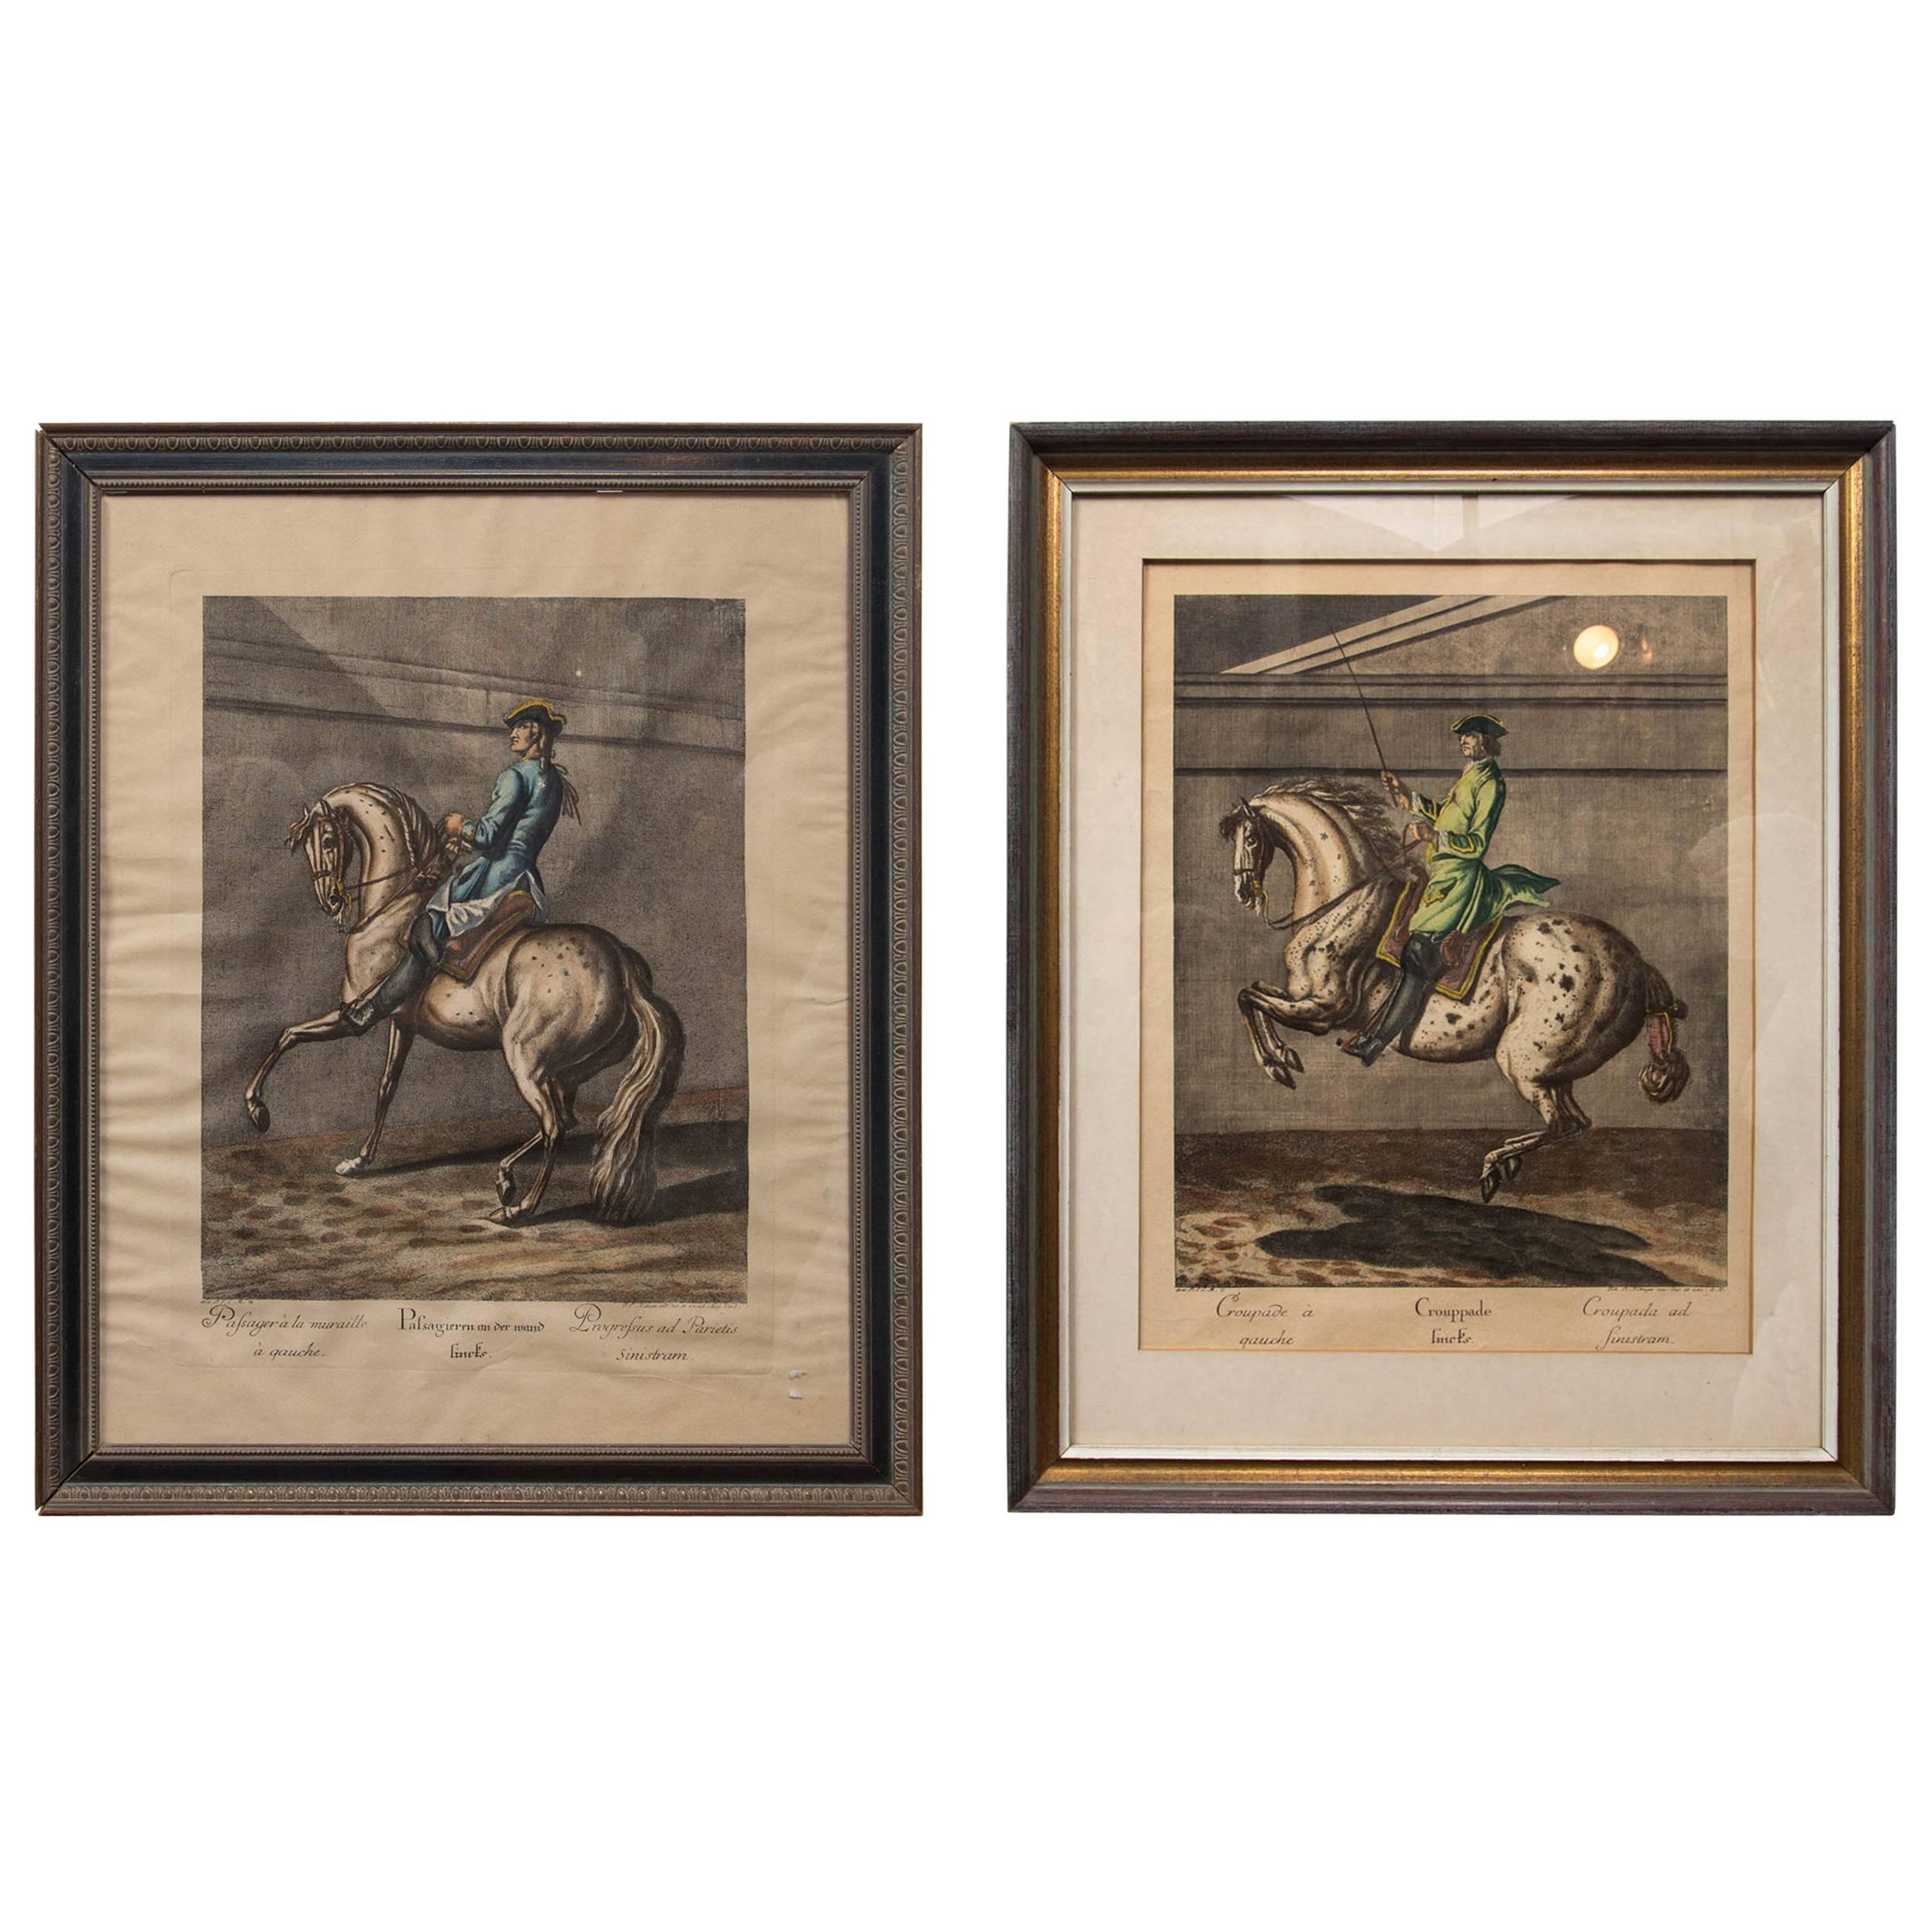 Pair of Engravings of Horses and Riders in Dressage Poses